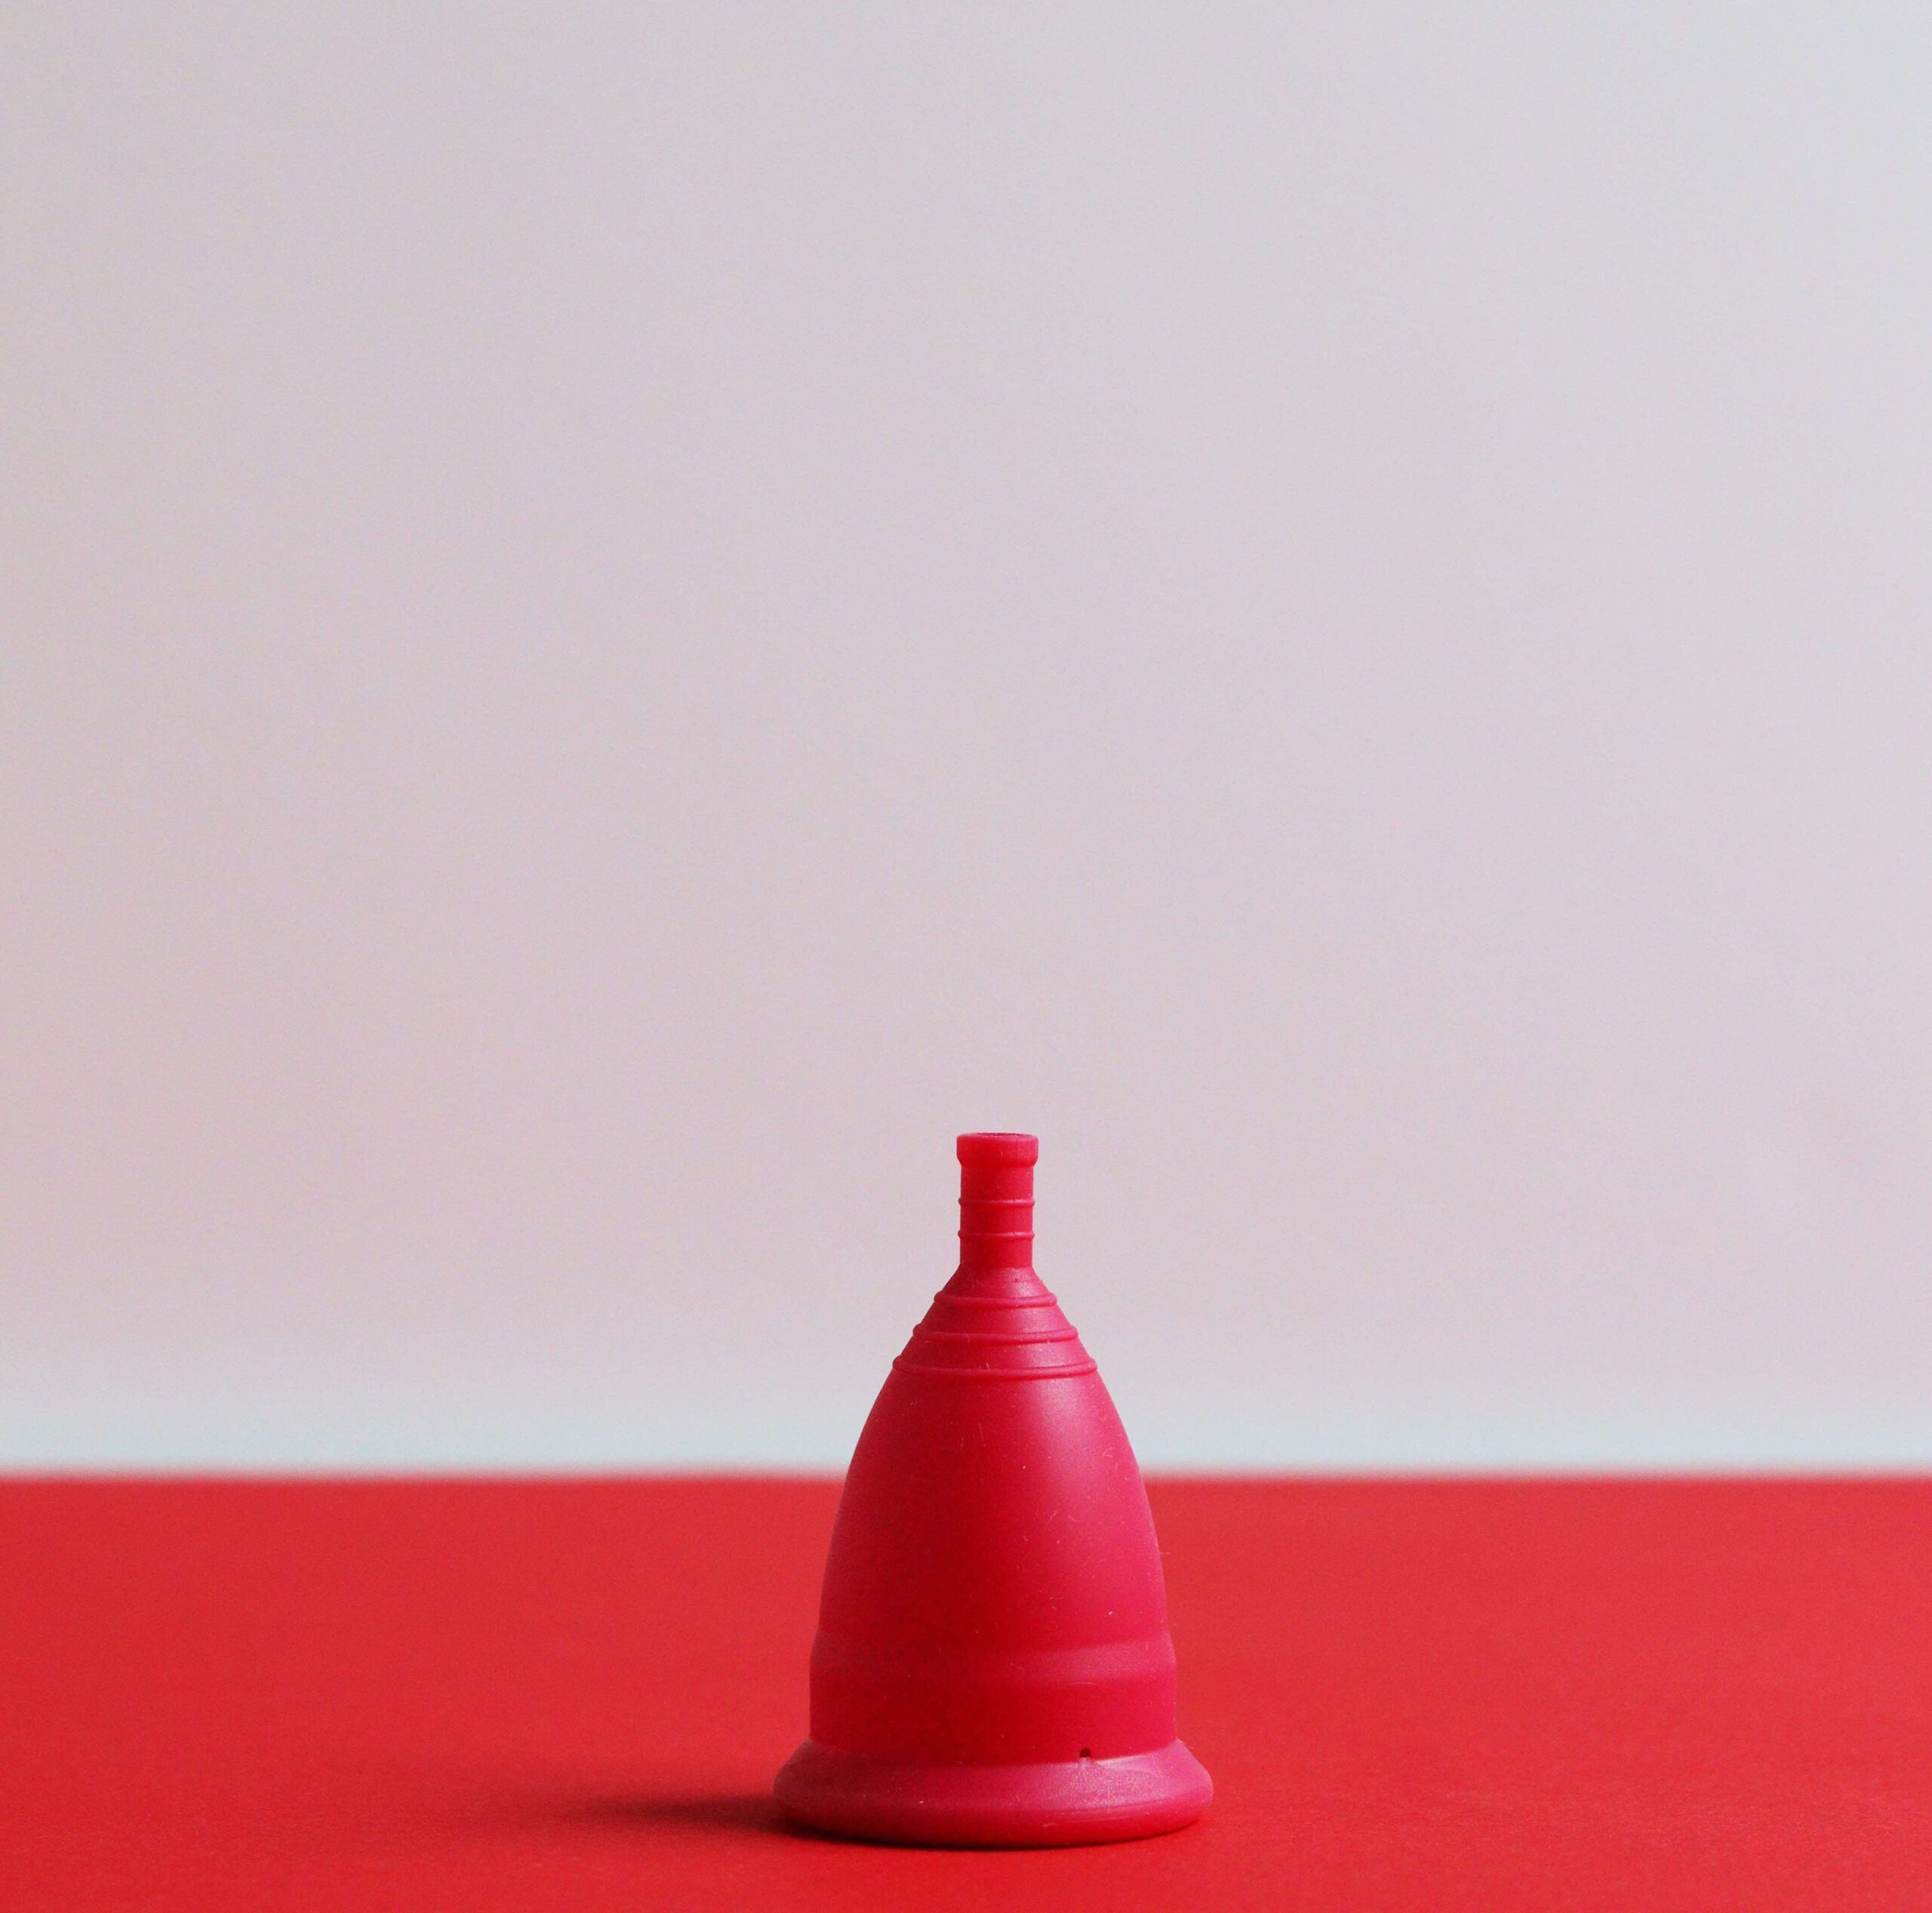 Image of red mooncup on a red table against a light grey background